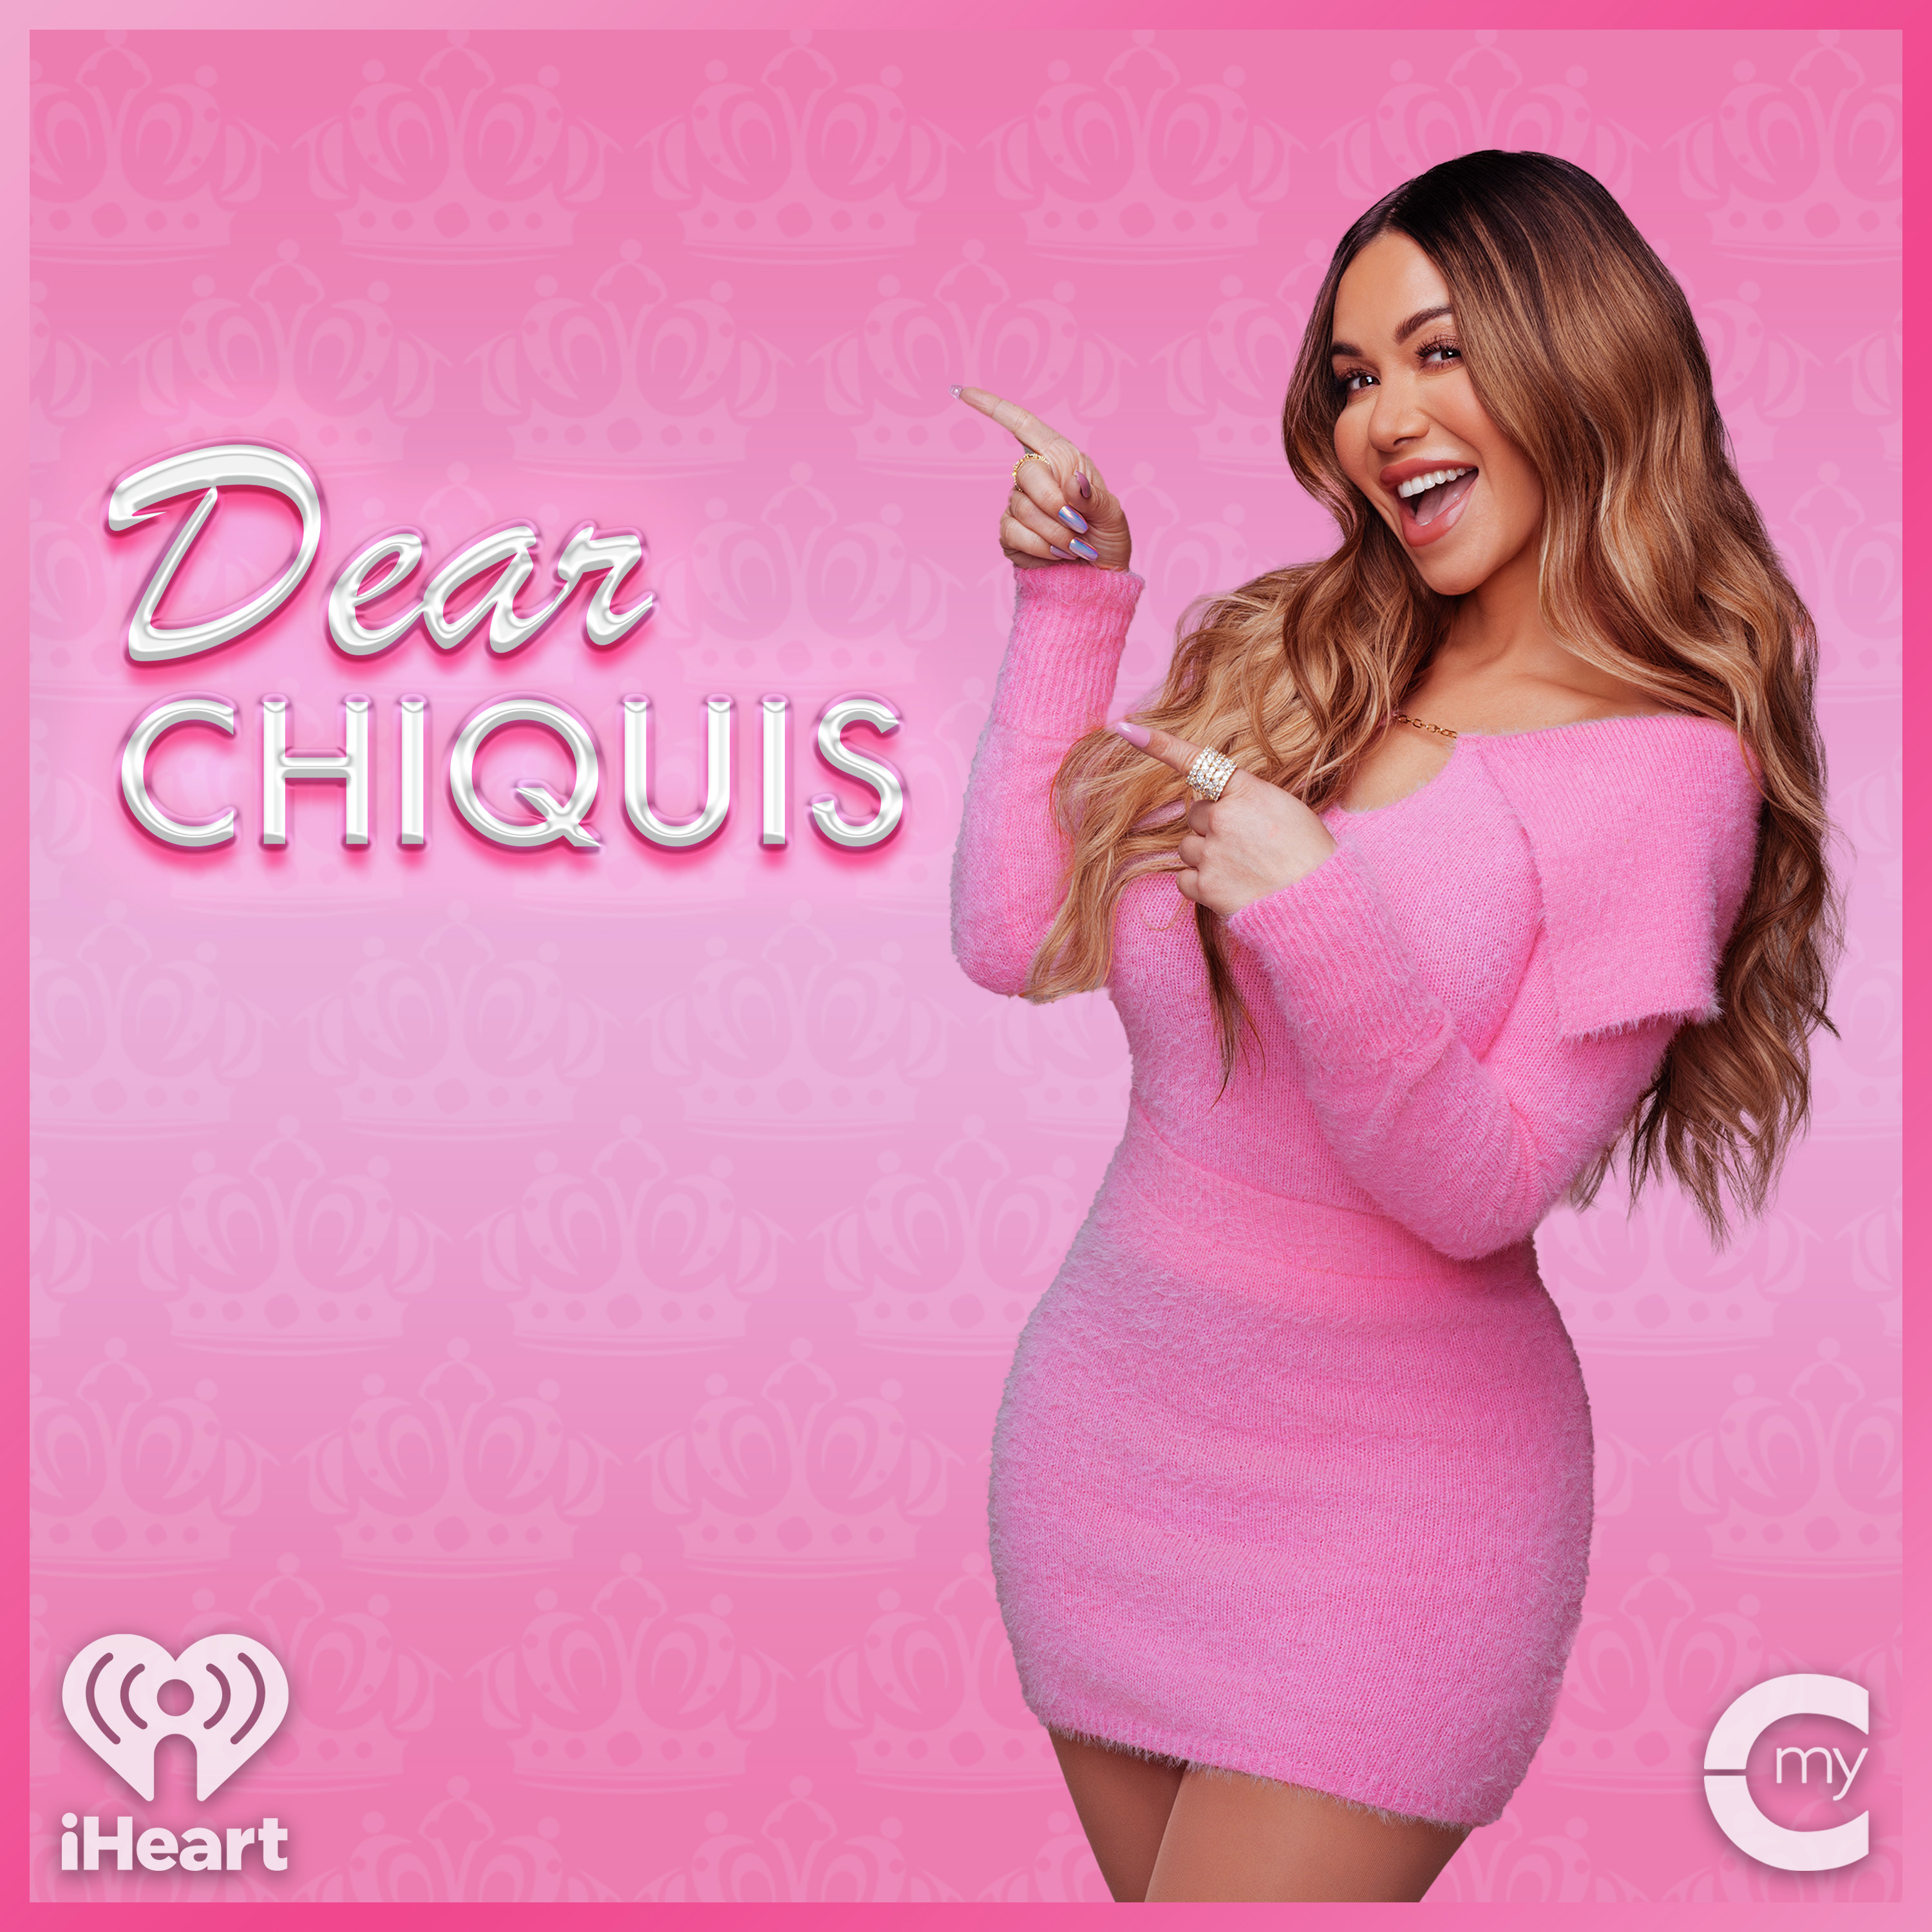 Dear Chiquis: Long-Distance Relationships, Getting Over Someone and Faith